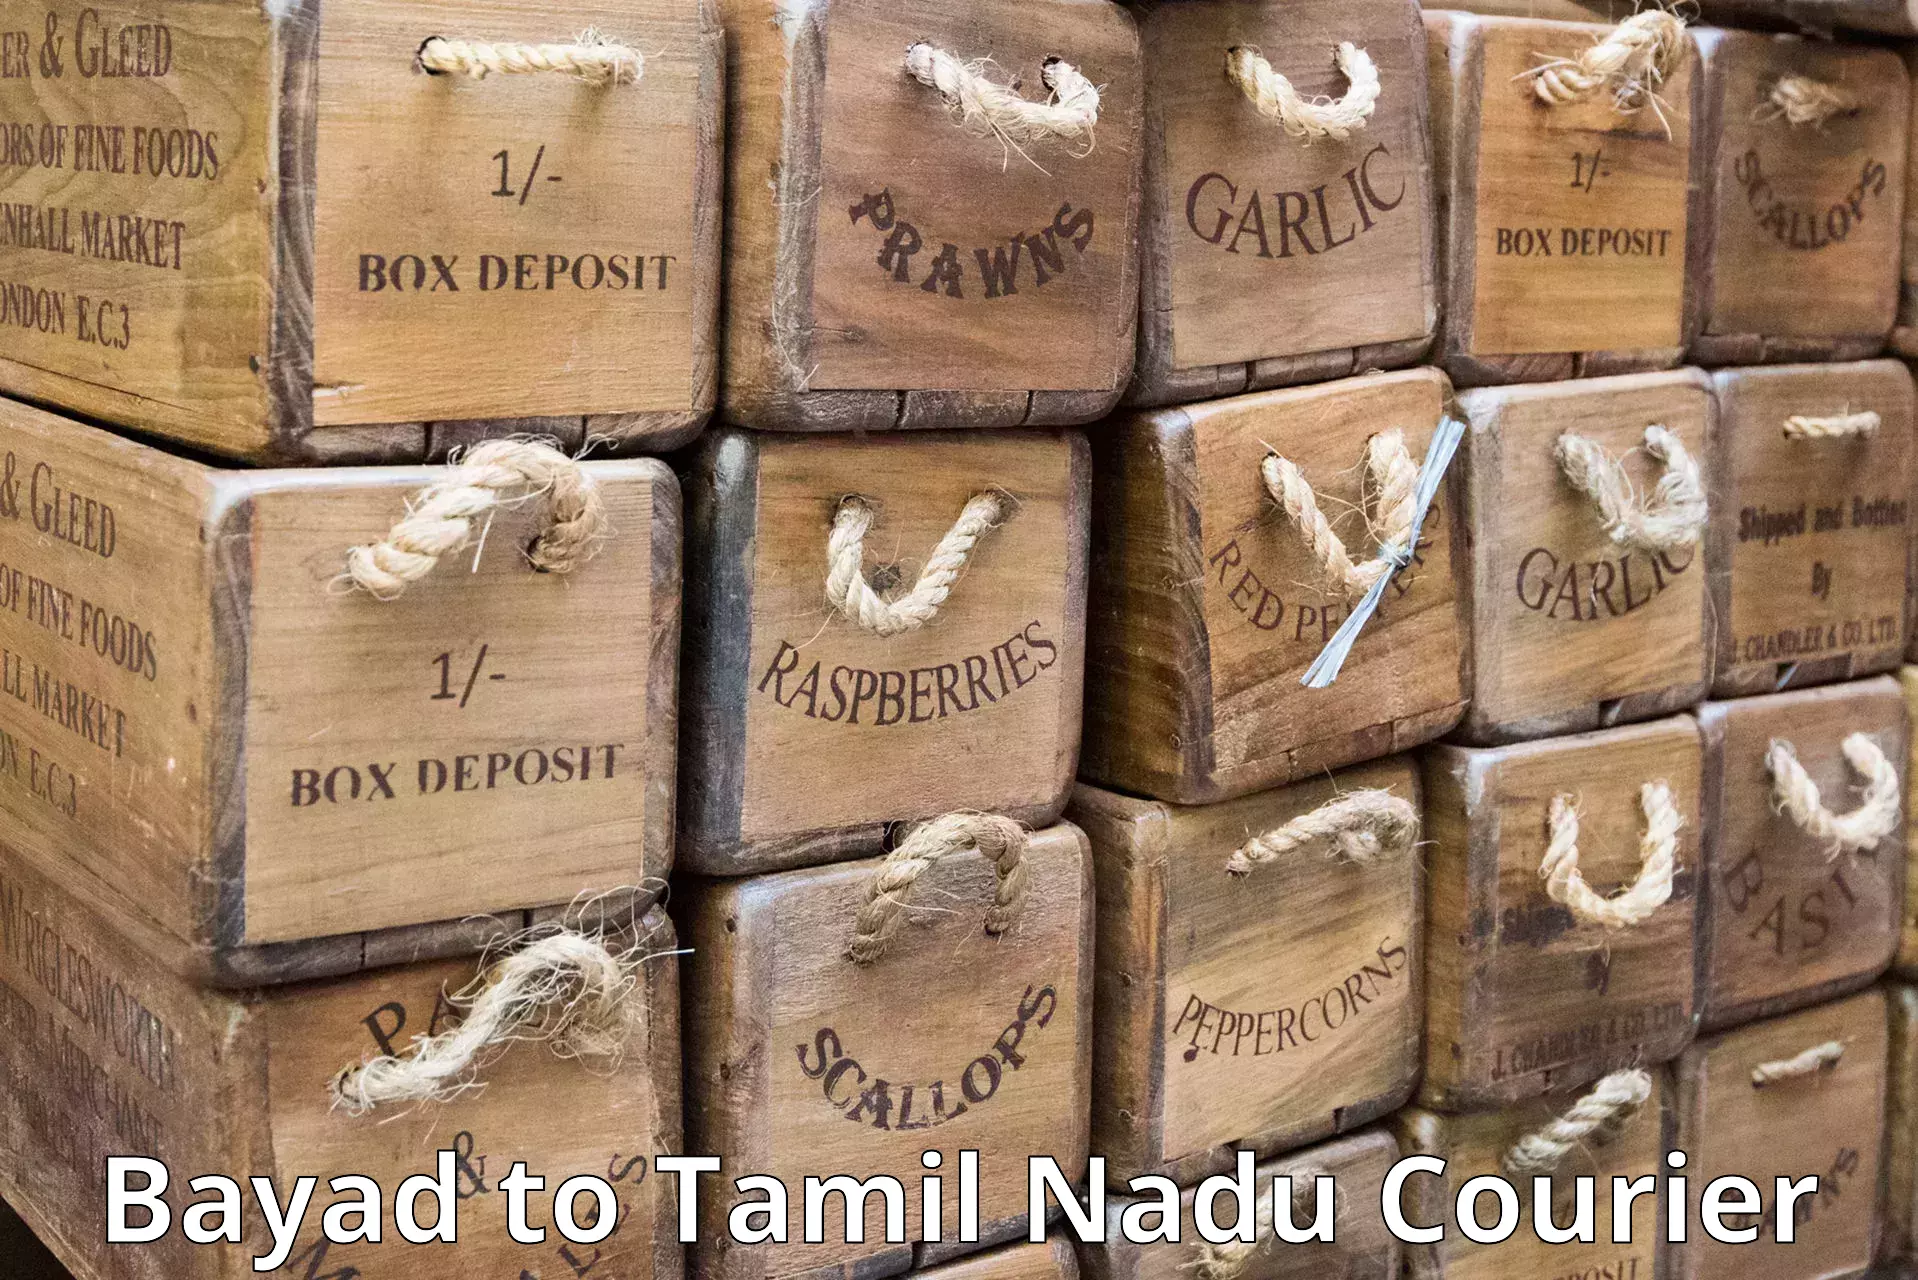 On-demand courier Bayad to Chennai Port